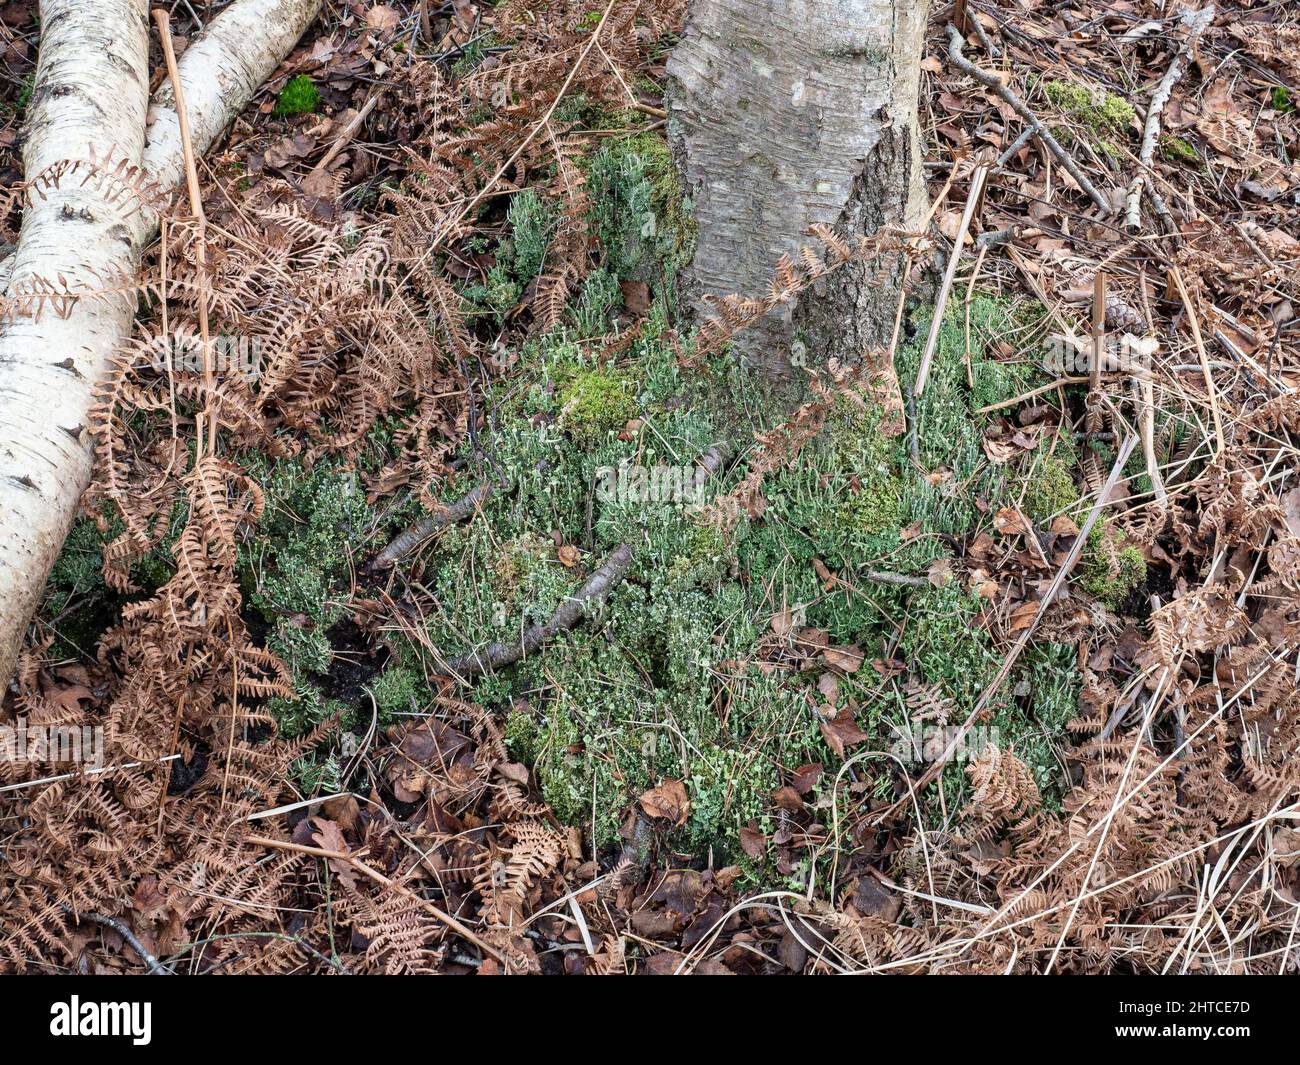 A group of Cladonia lichens growing at the base to a tree in birch woodland Stock Photo